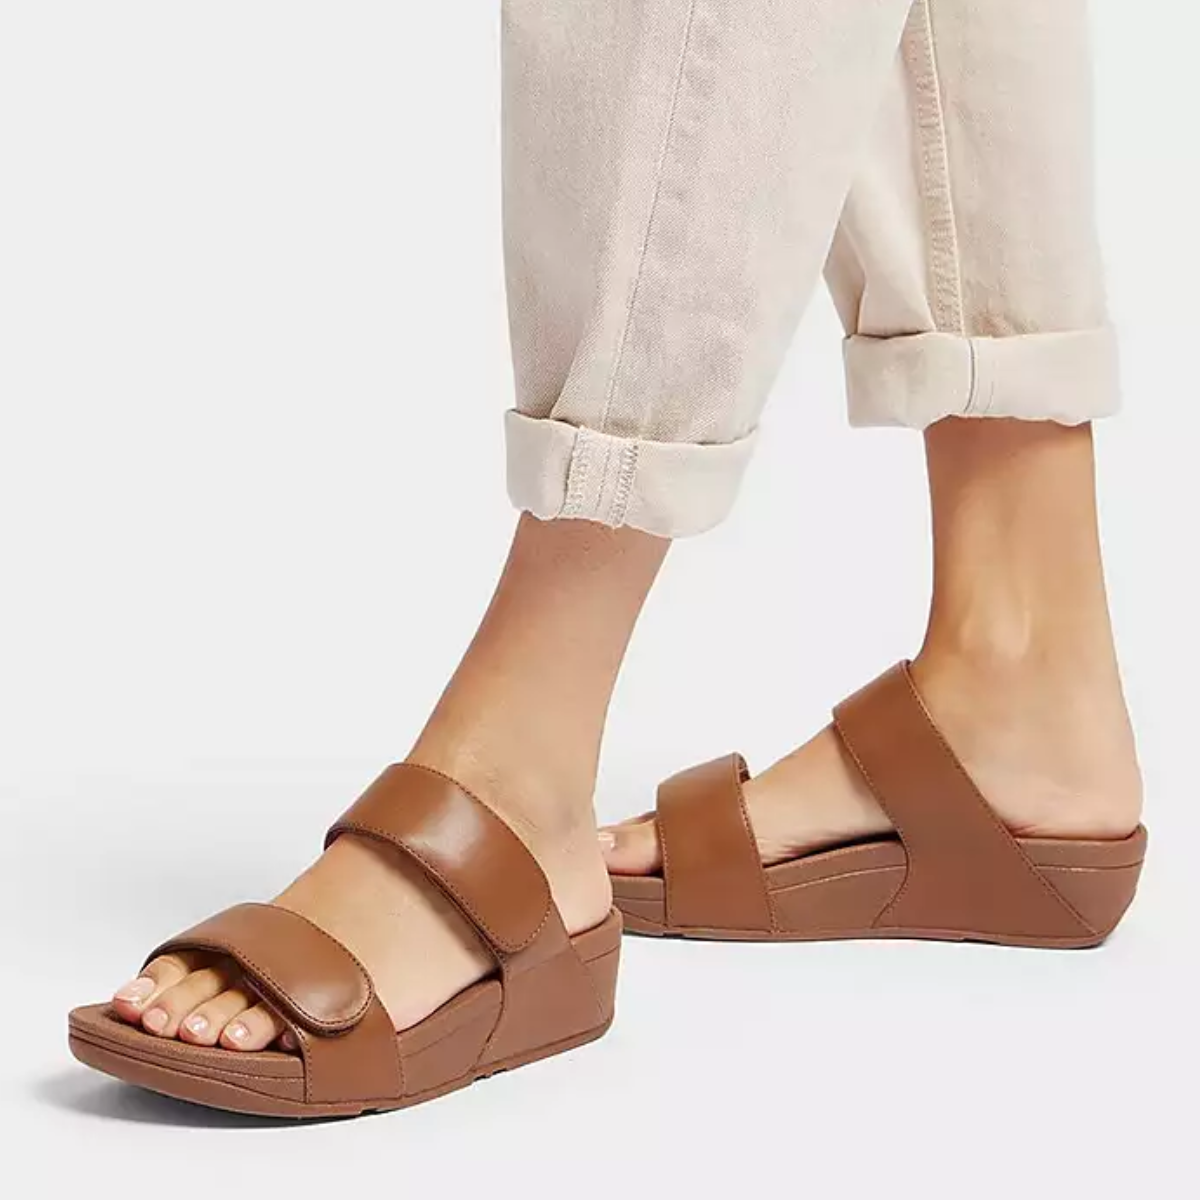 A woman's feet in a pair of Lulu Adjustable Leather Slides in Light Tan sandals featuring the all-day supercushioning comfort of the FITFLOP USA LLC sandal.